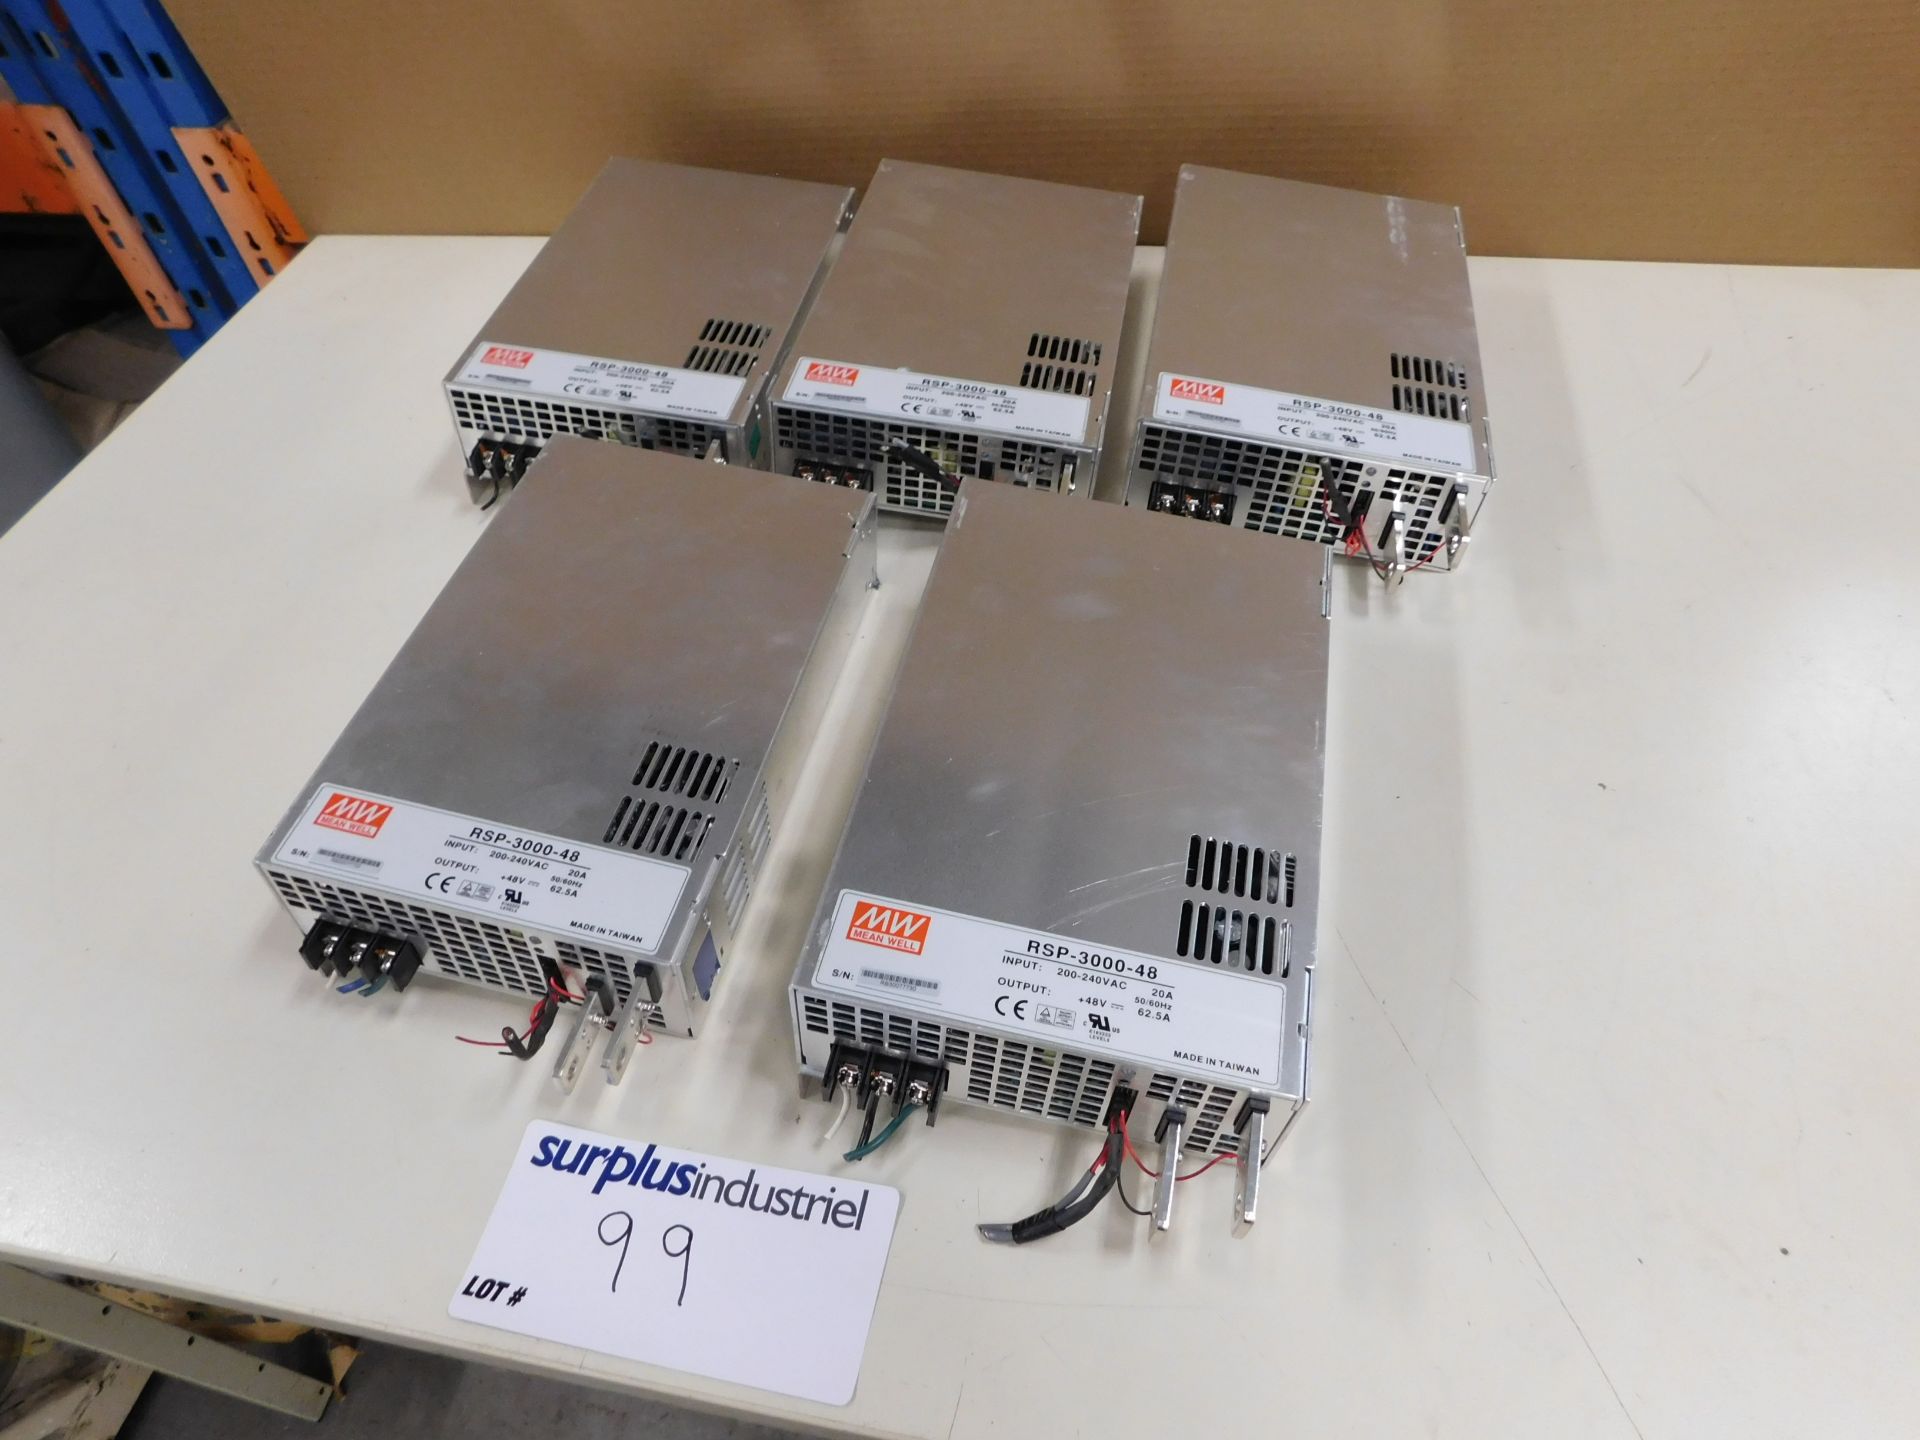 RSP-3000-48 POWER SUPPLY